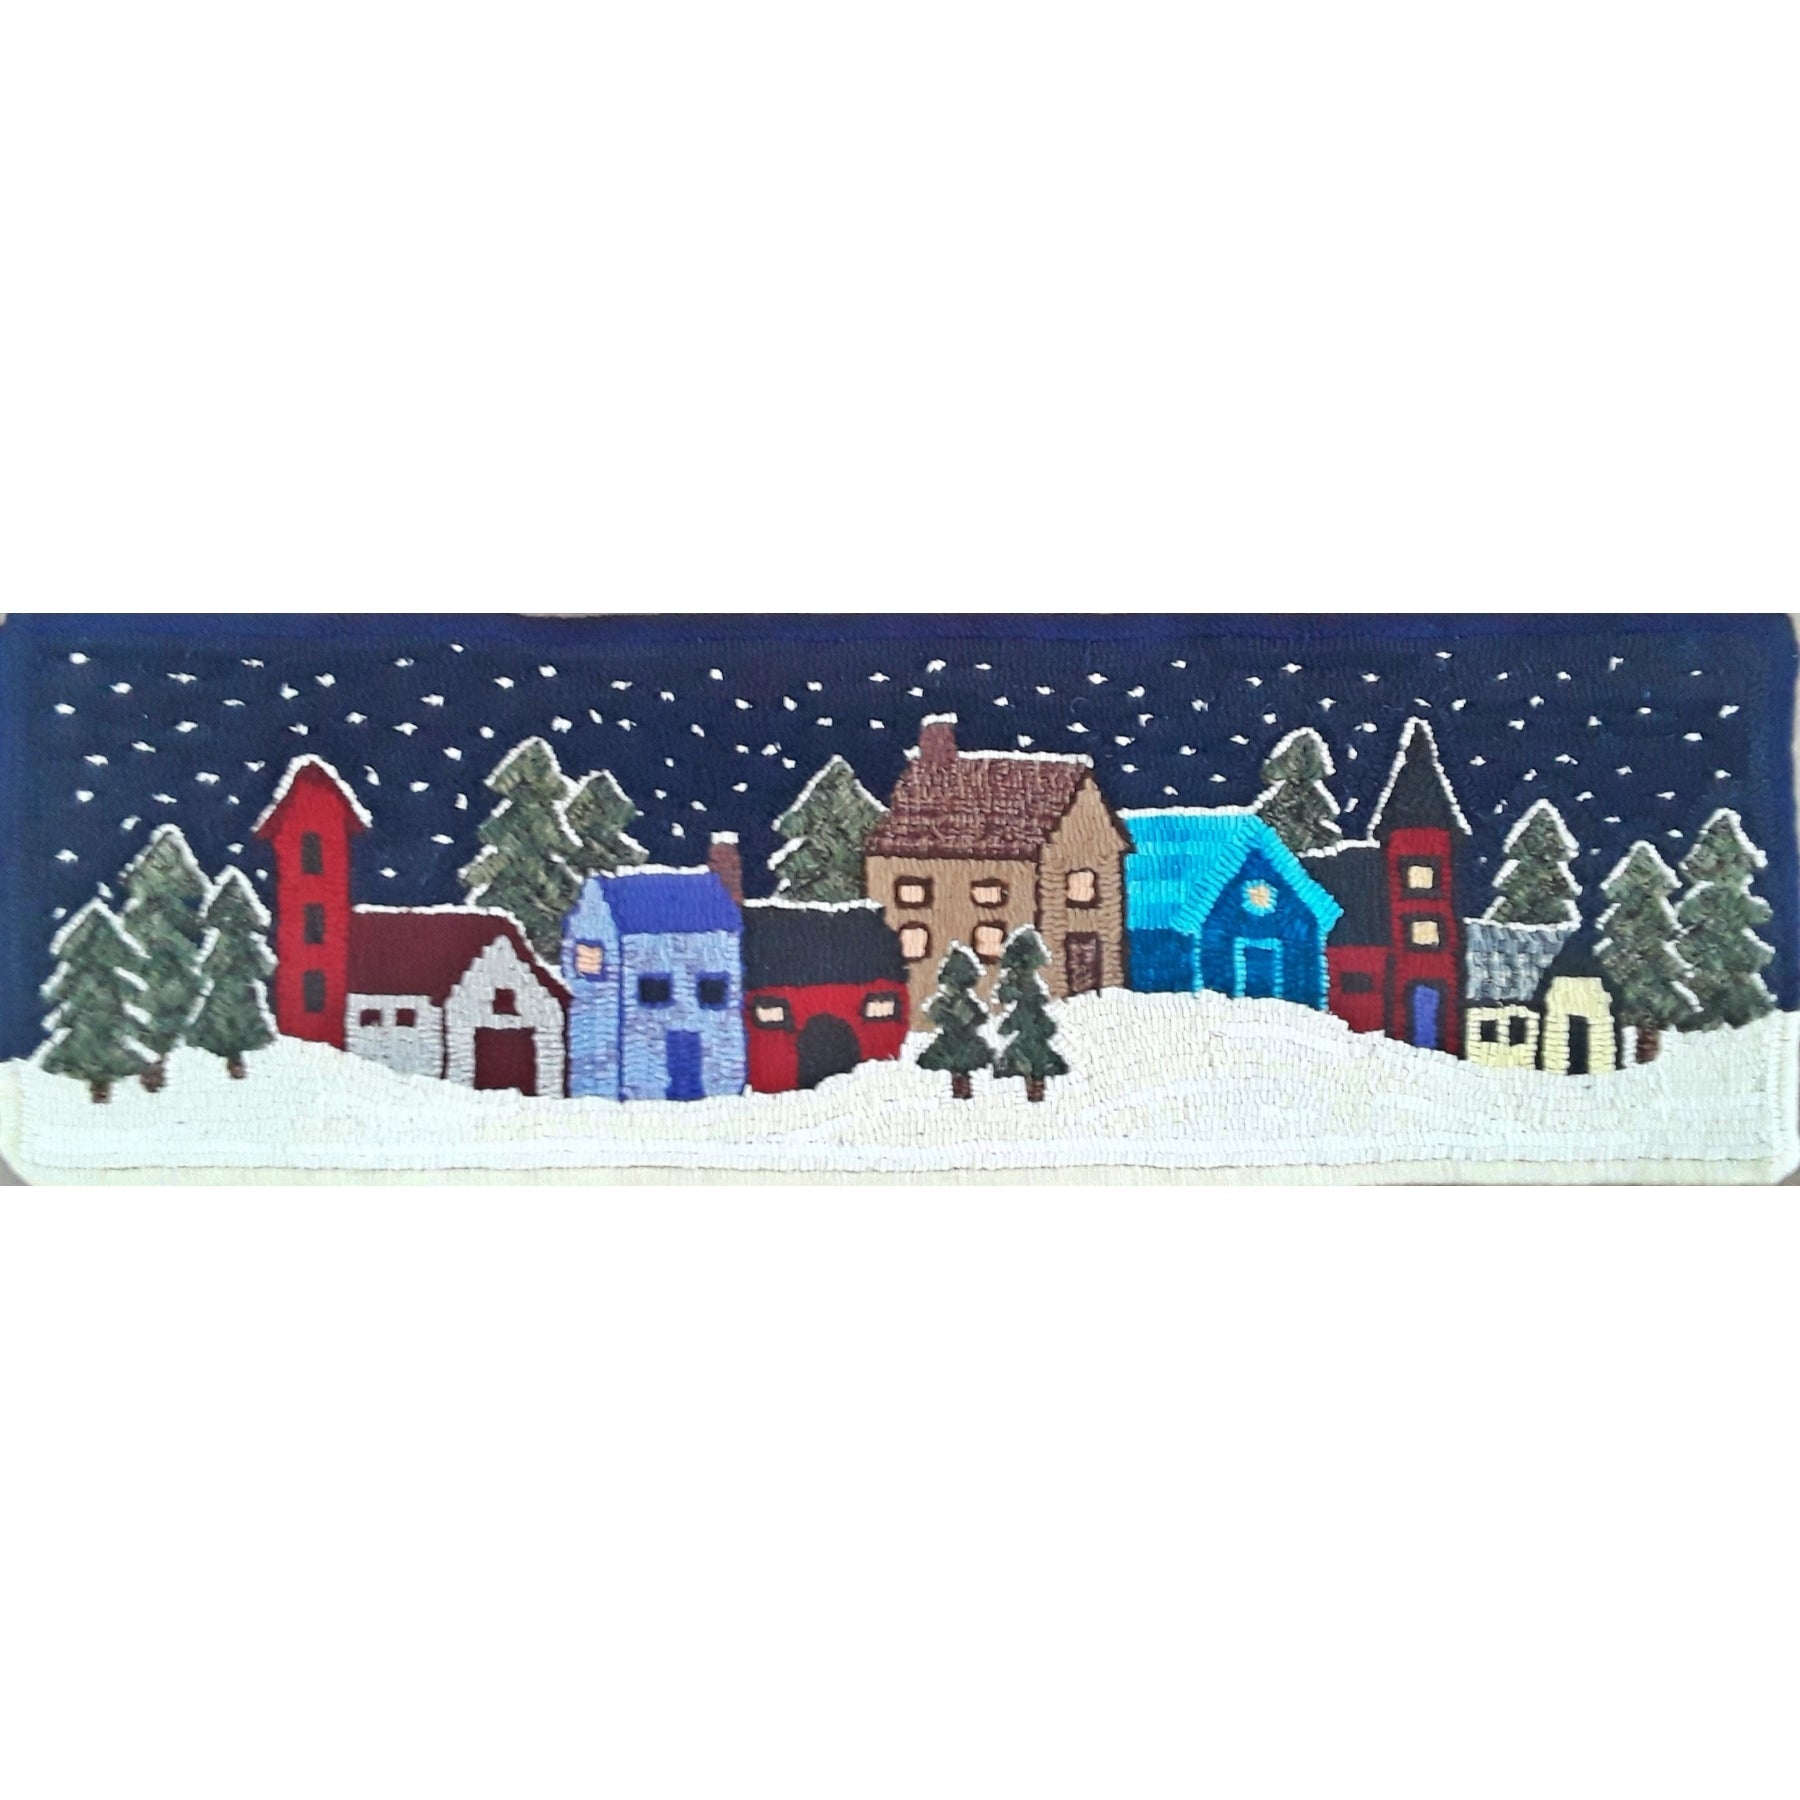 Snowy Village, rug hooked by Biffie Gallant